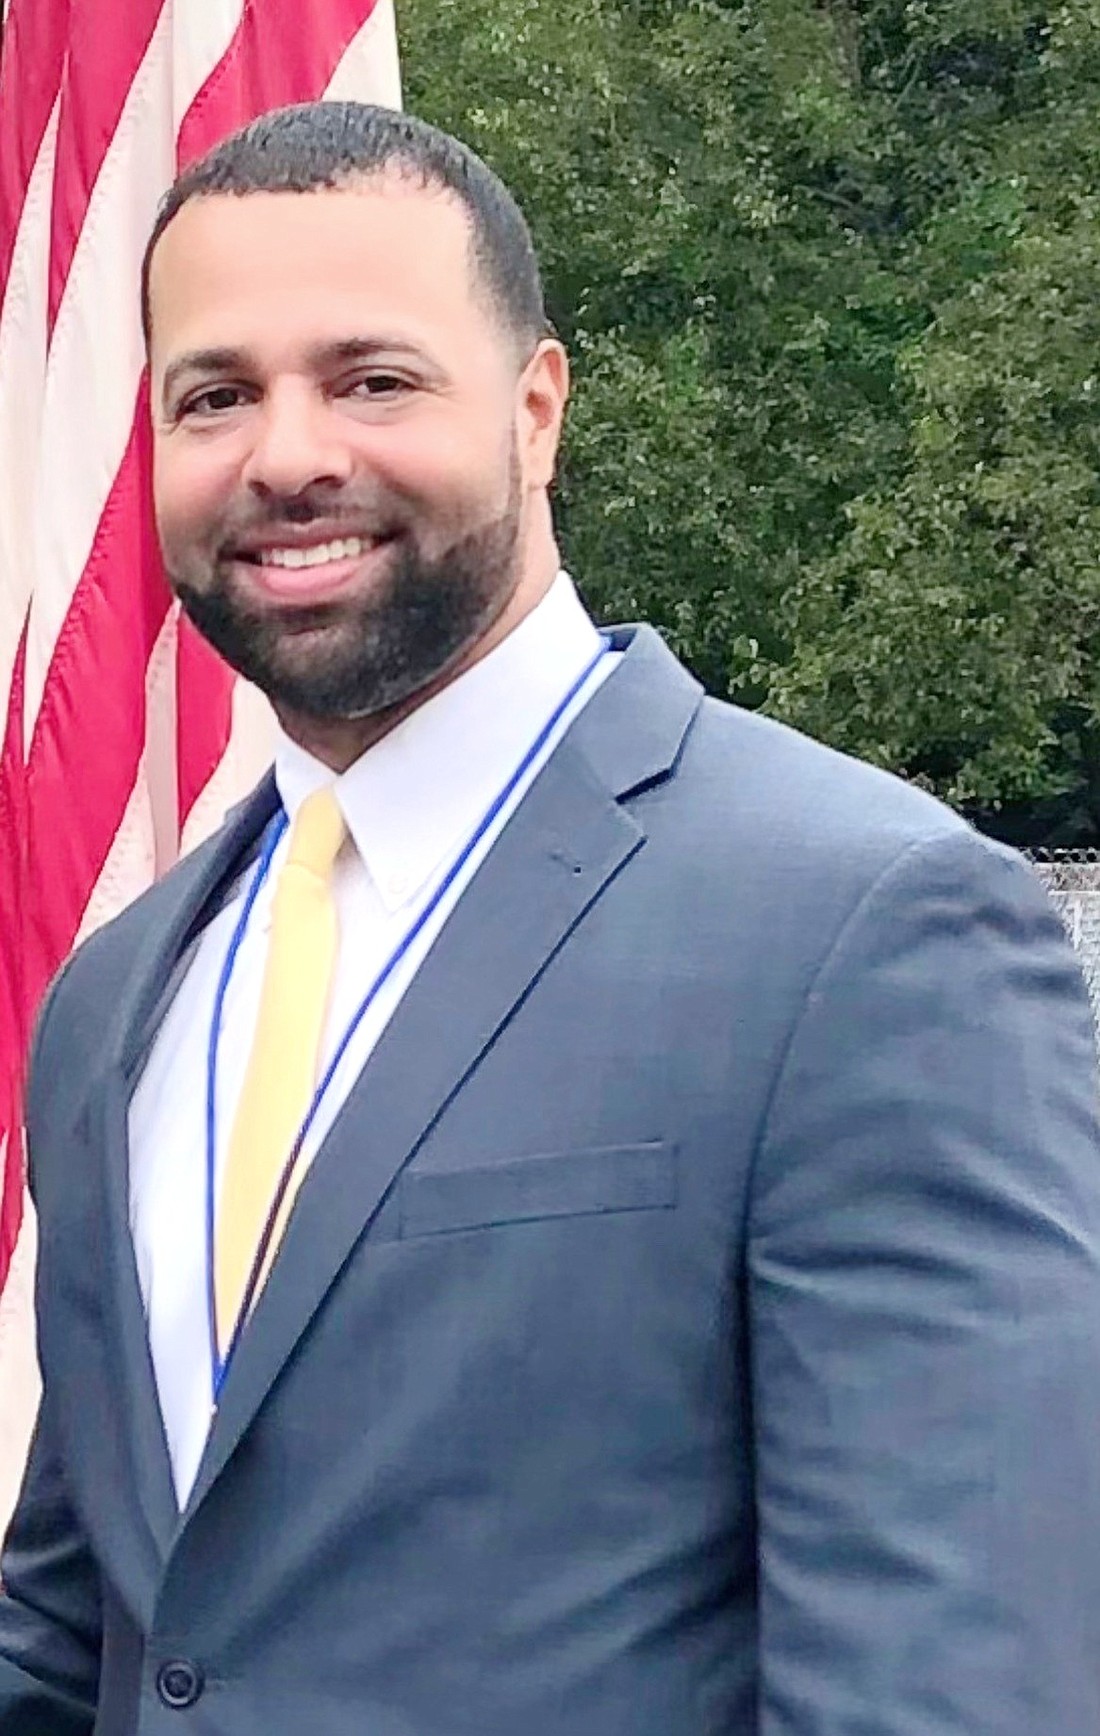 Bryant Romano, most recently known as the John F. Kennedy Elementary School assistant principal, is the new co-principal at Port Chester Middle School.